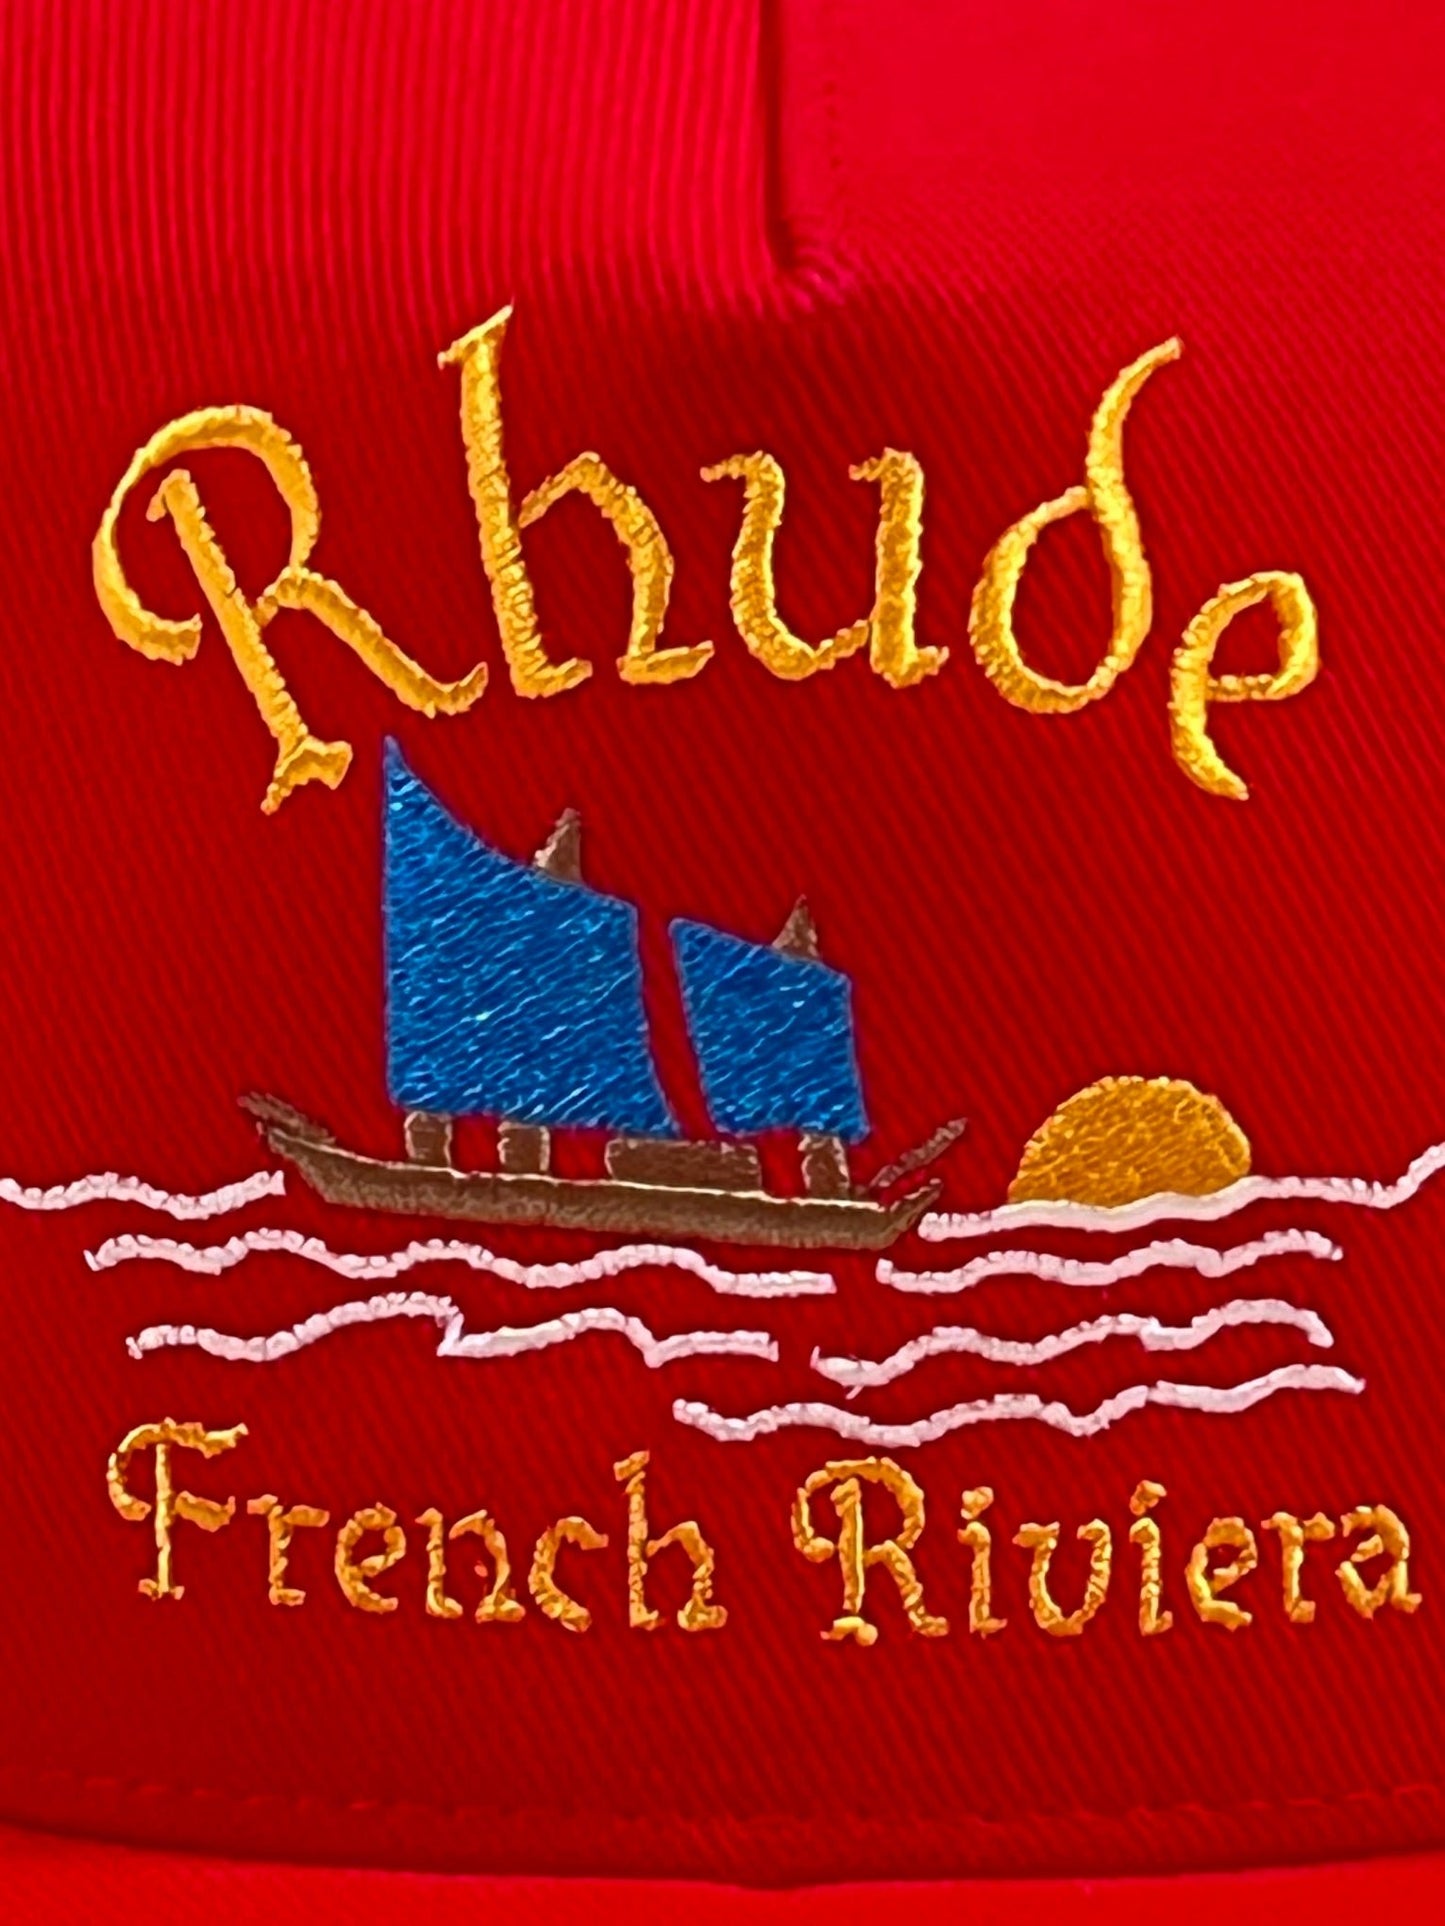 Embroidered RHUDE logo with the text "rhude french riviera" featuring a sailboat and sun design on a RHUDE RIVIERA SAILING HAT RED.